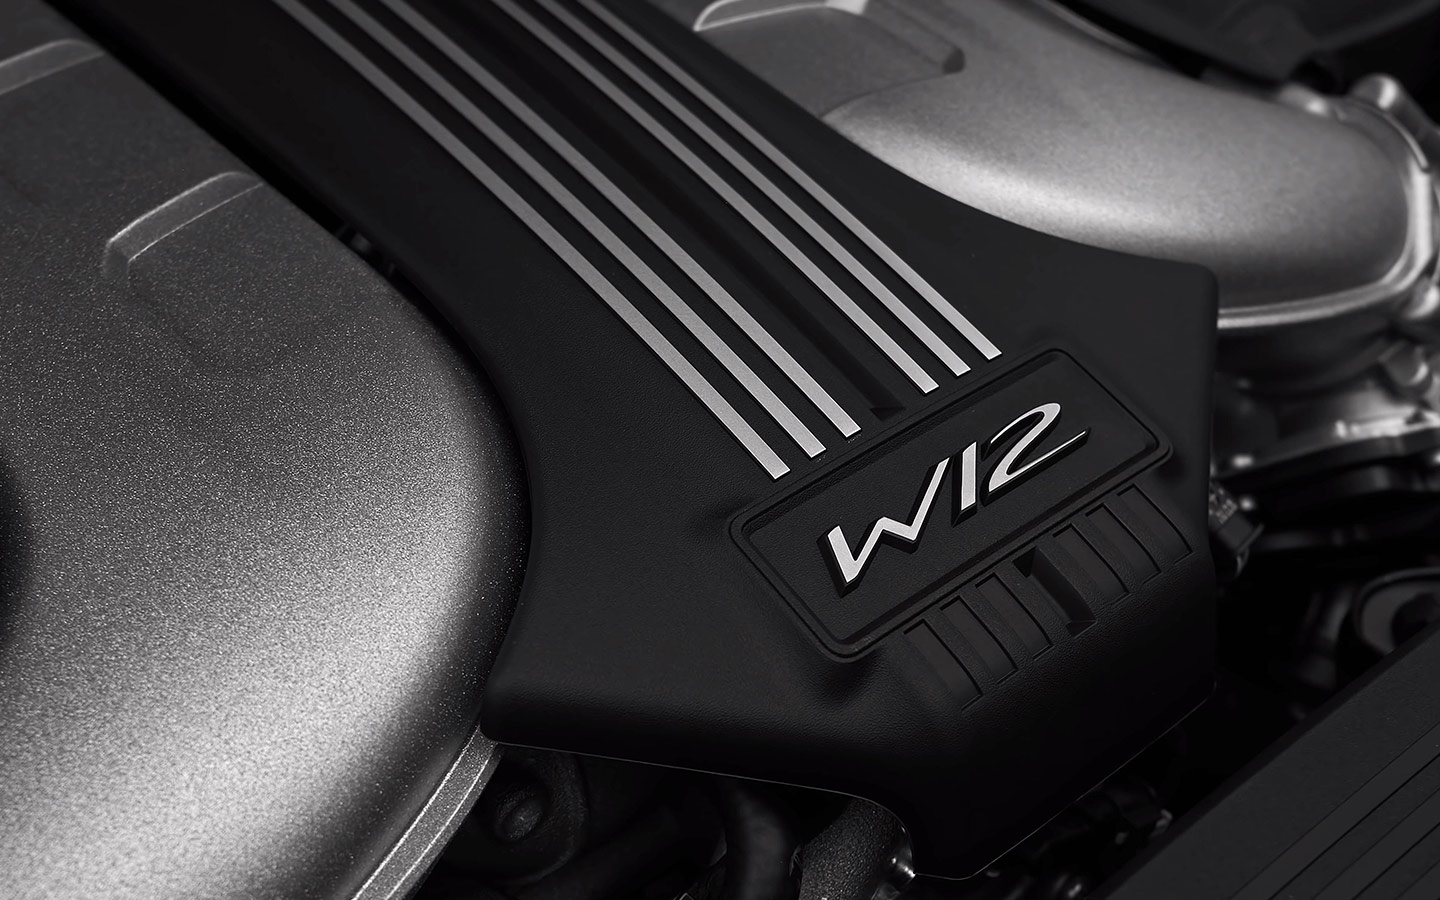 the W12 engine gave VW Golf the power of 641 horsepower